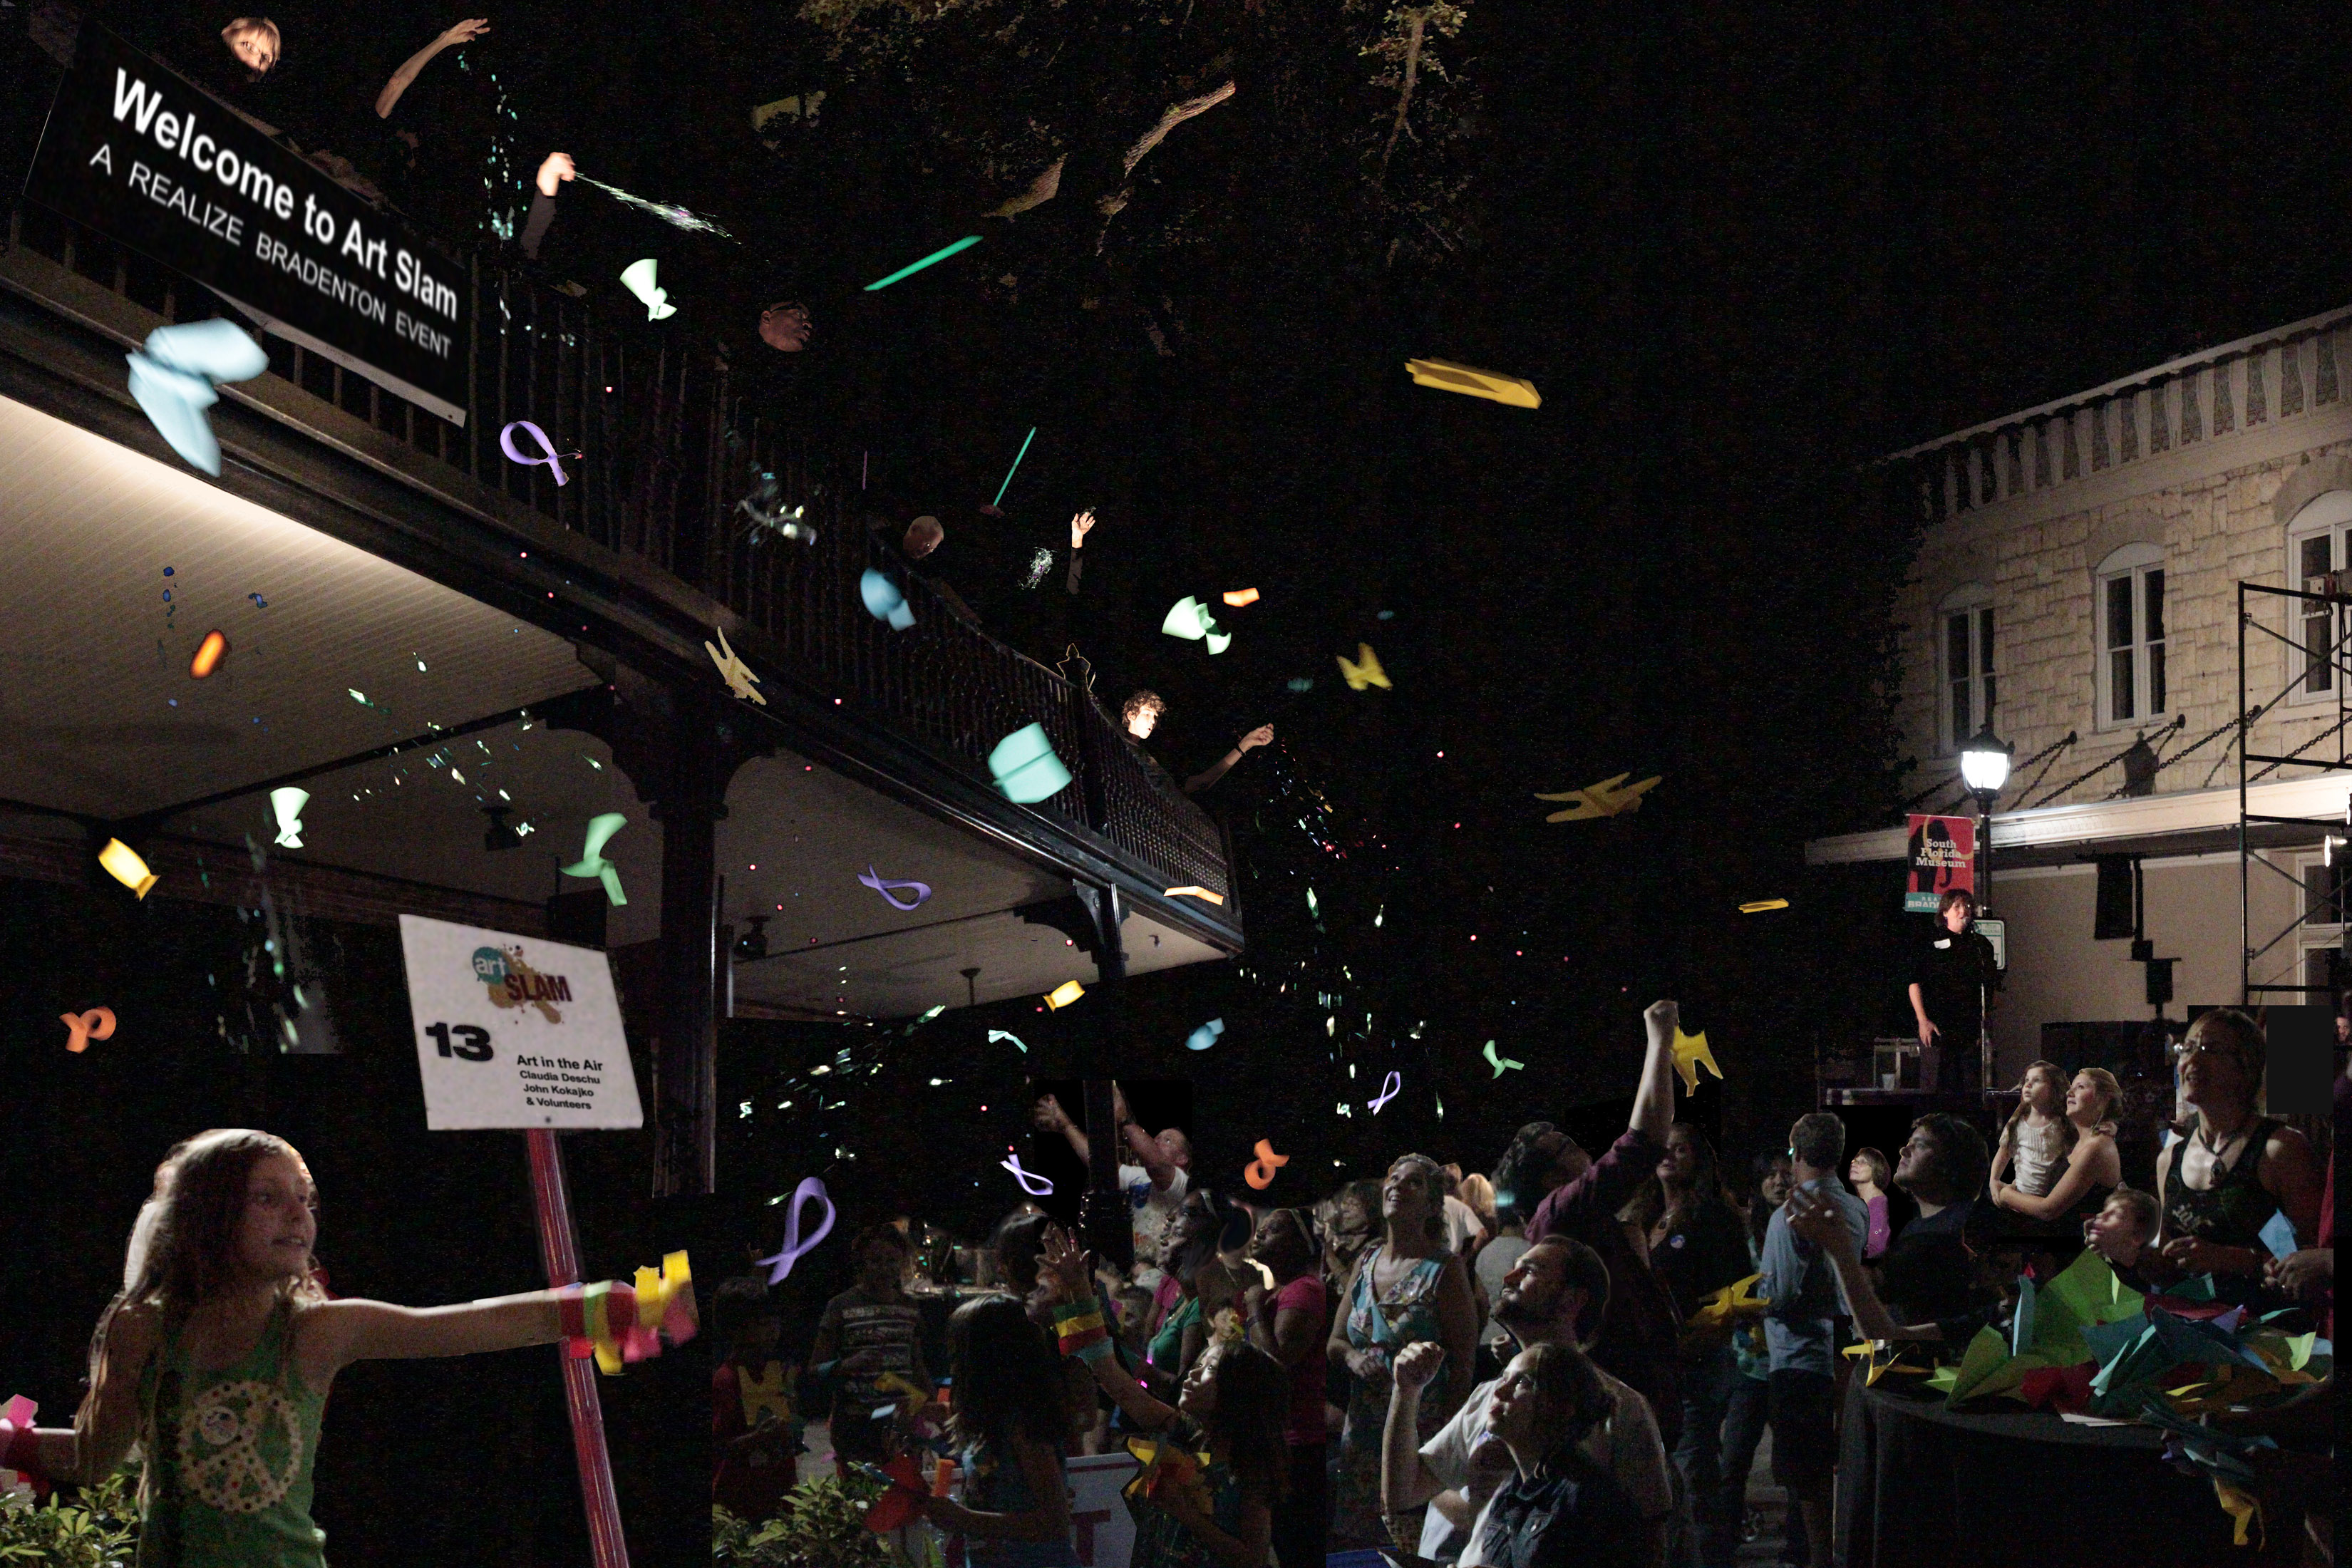 Art in the Air – paper airplanes being launched from balcony and caught by audience